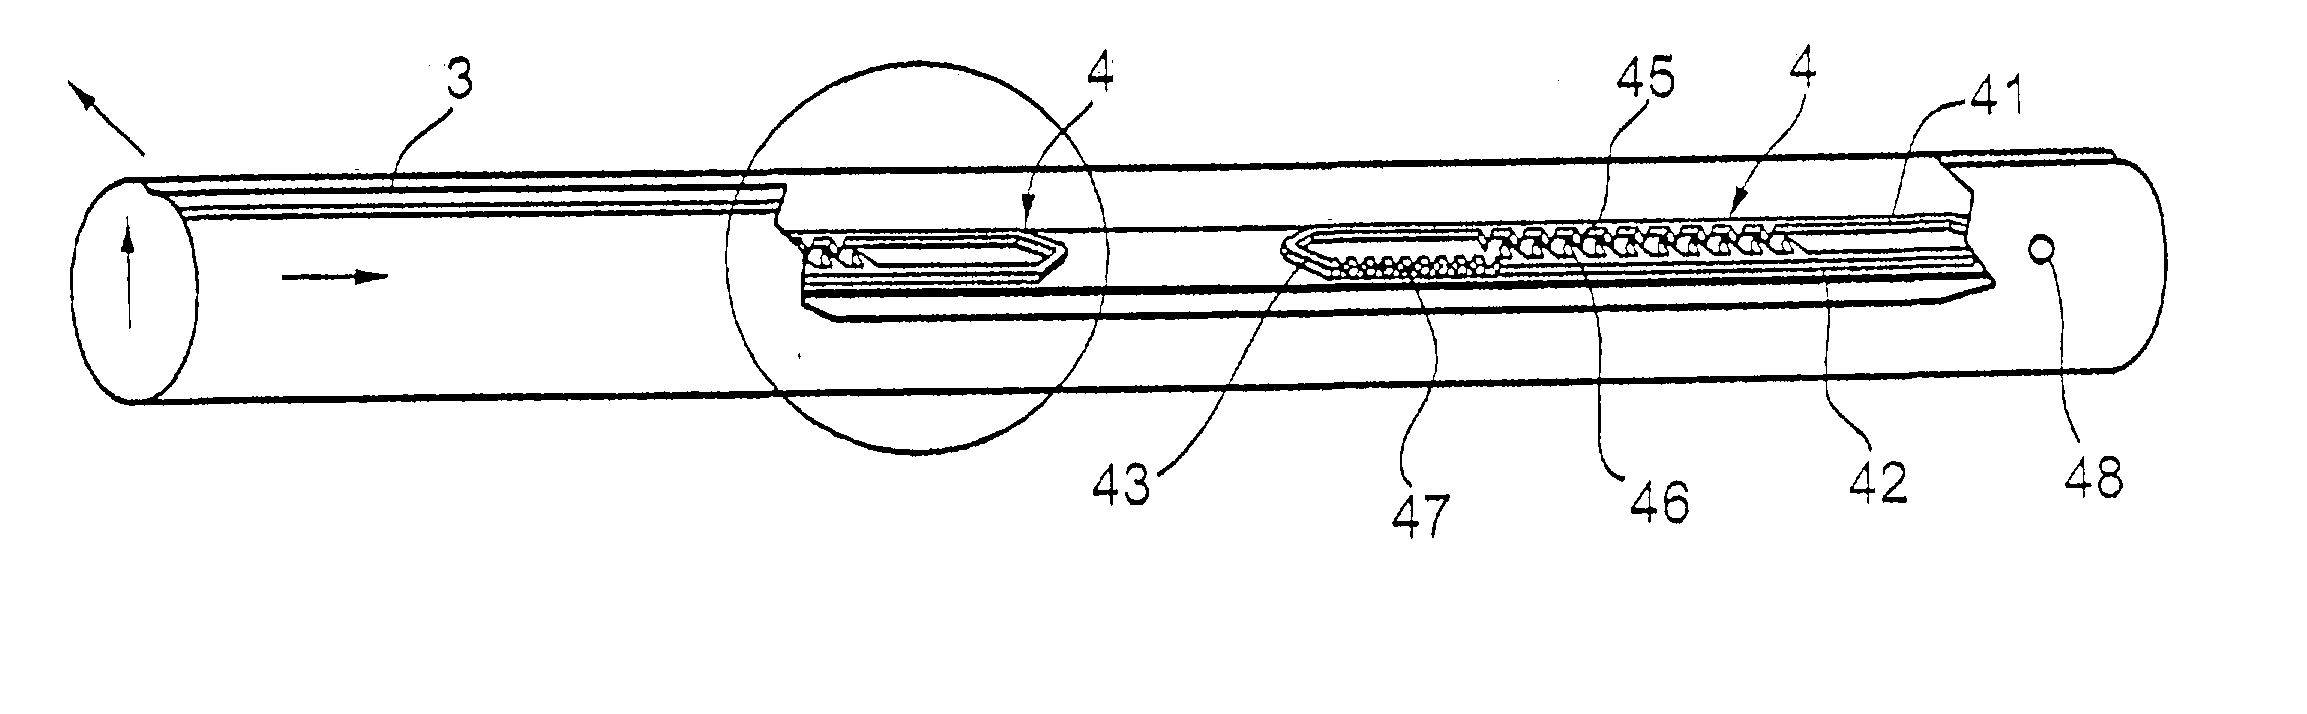 Drip irrigation hose and method and apparatus for making same